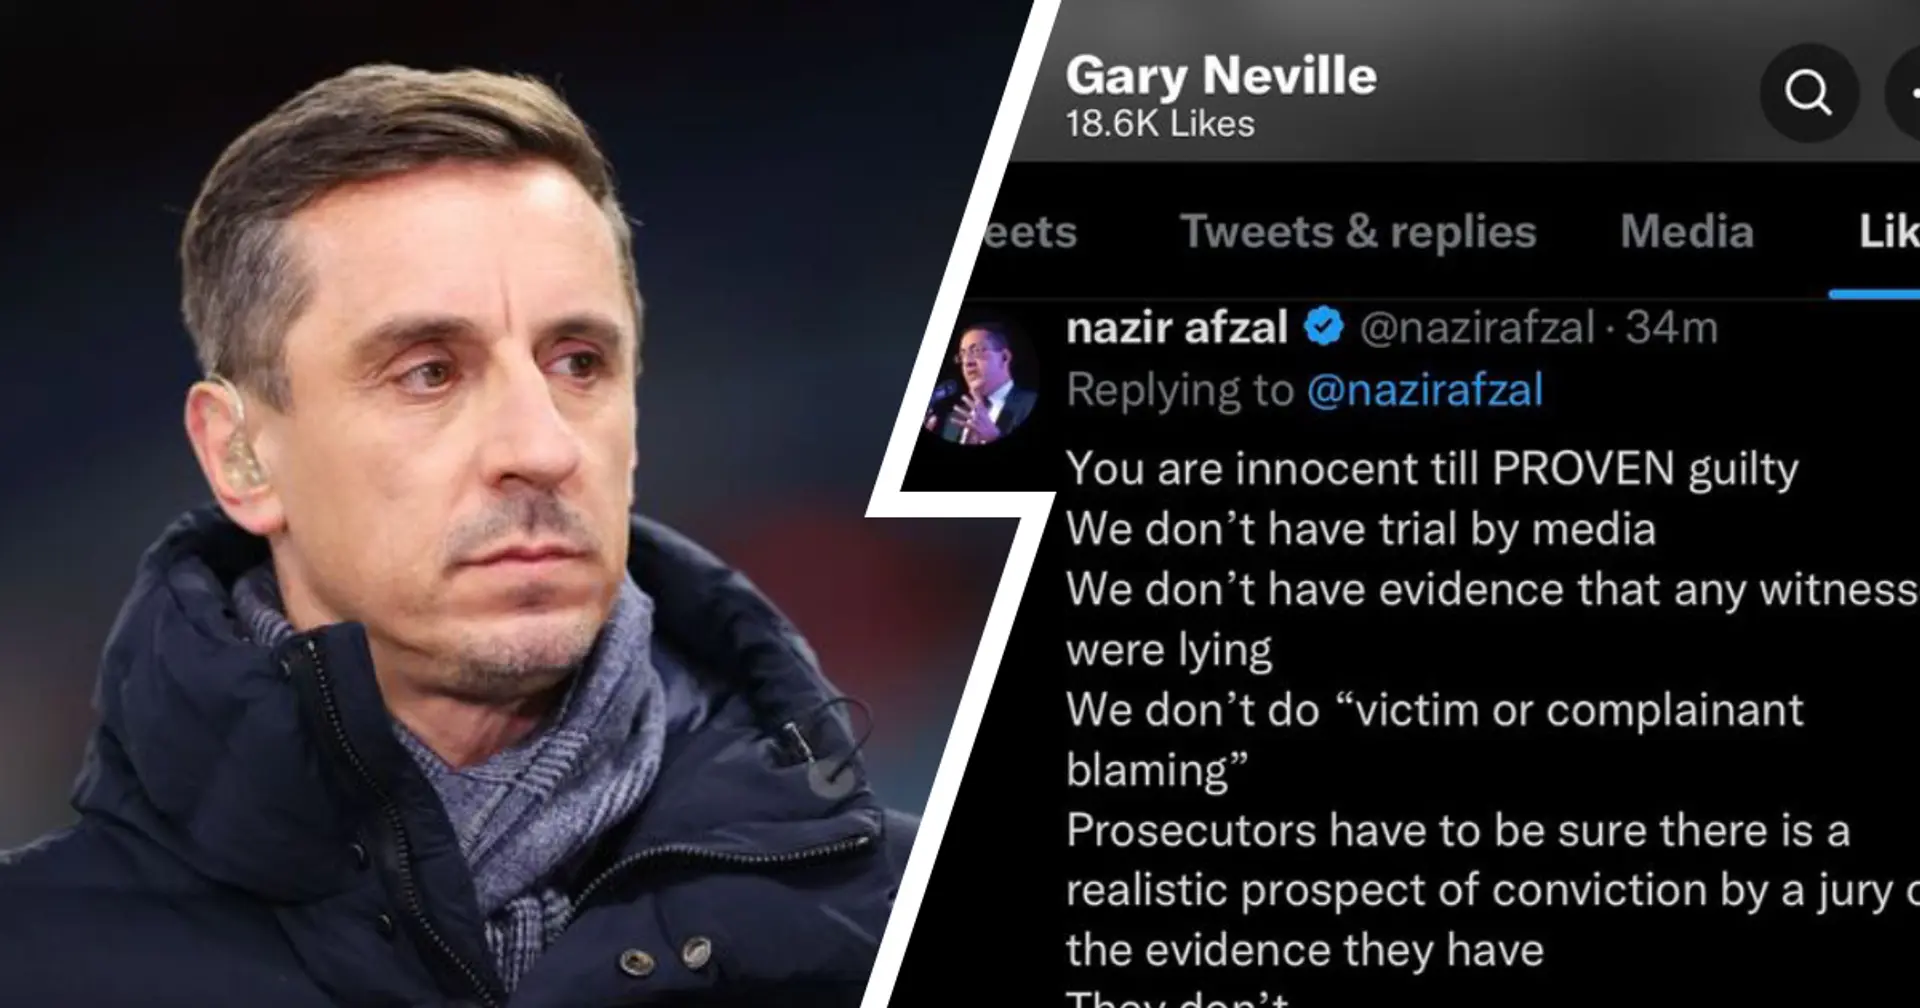 'I condemn violence against women': Gary Neville explains why he liked a tweet calling Mason Greenwood 'innocent'